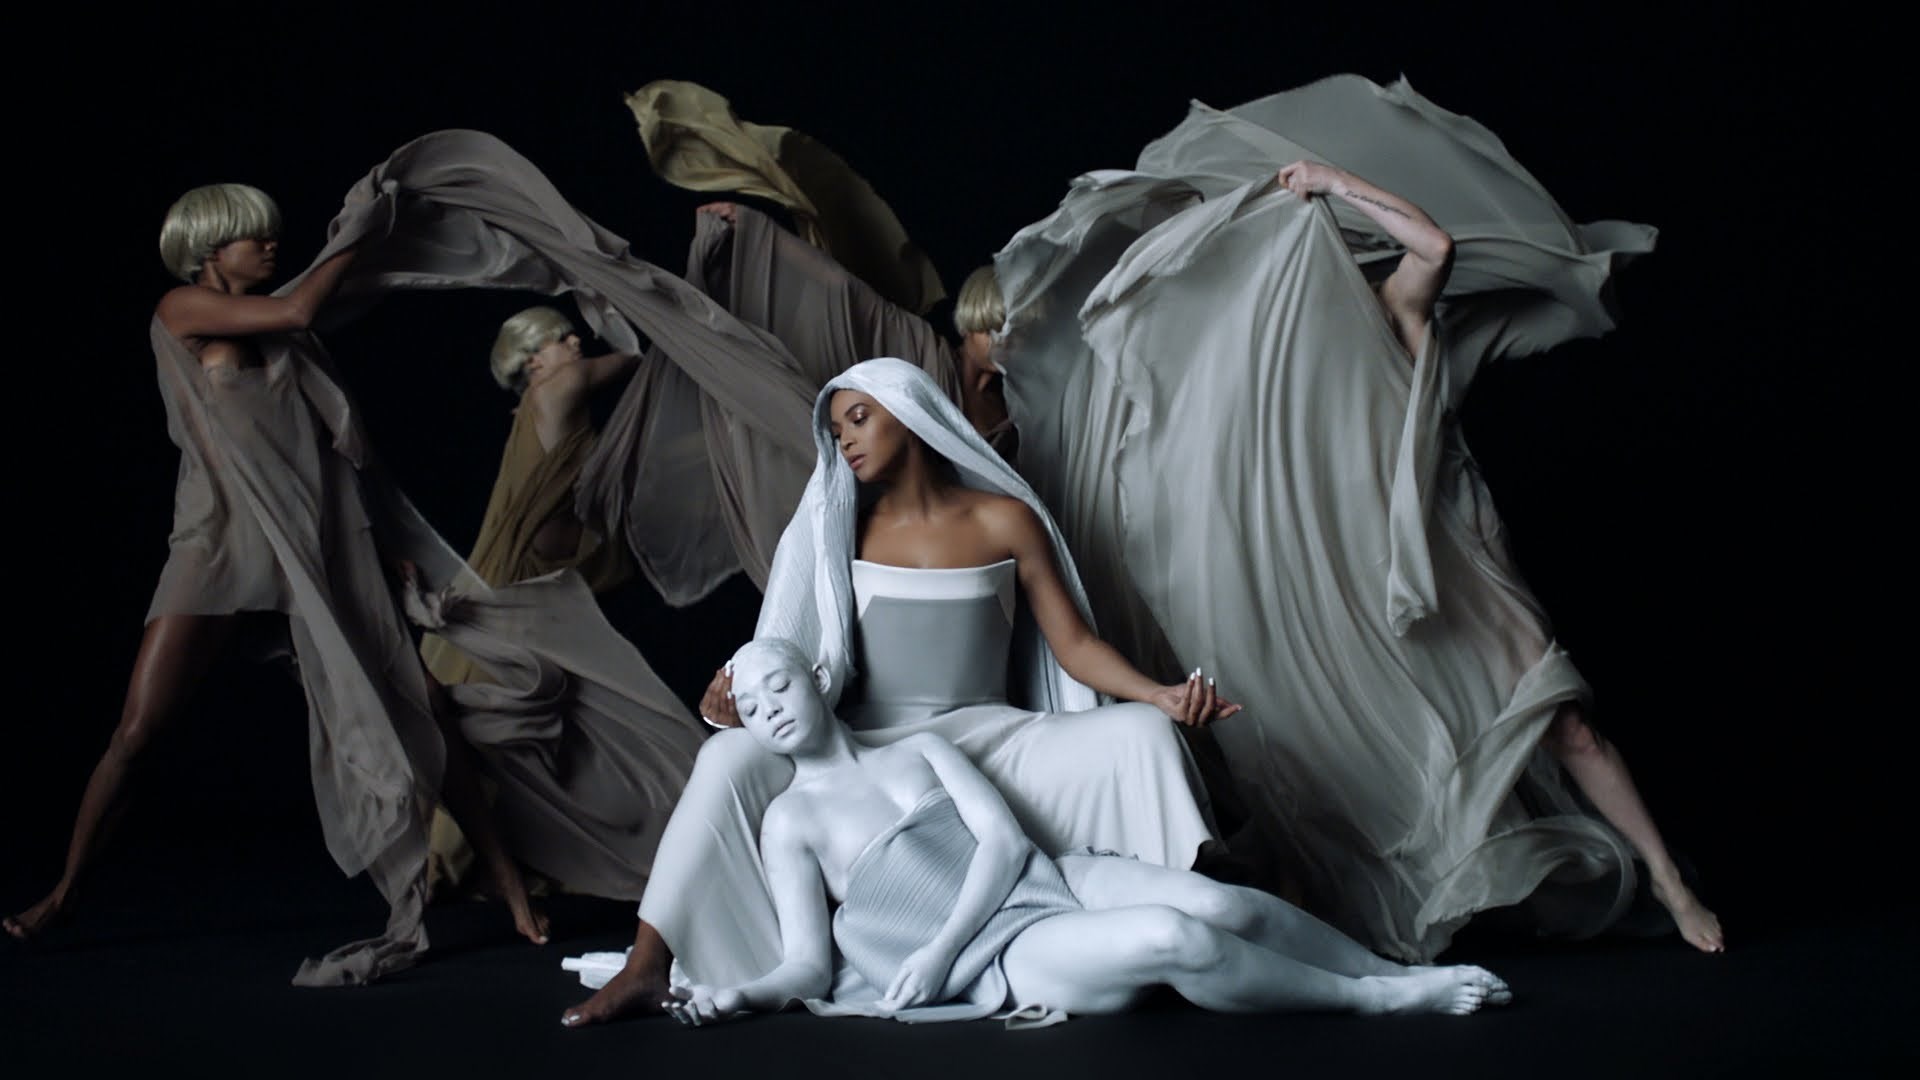 A woman in a white dress sits on the ground with white people in white body casts. They are surrounded by women in white flowing robes. - Beyonce